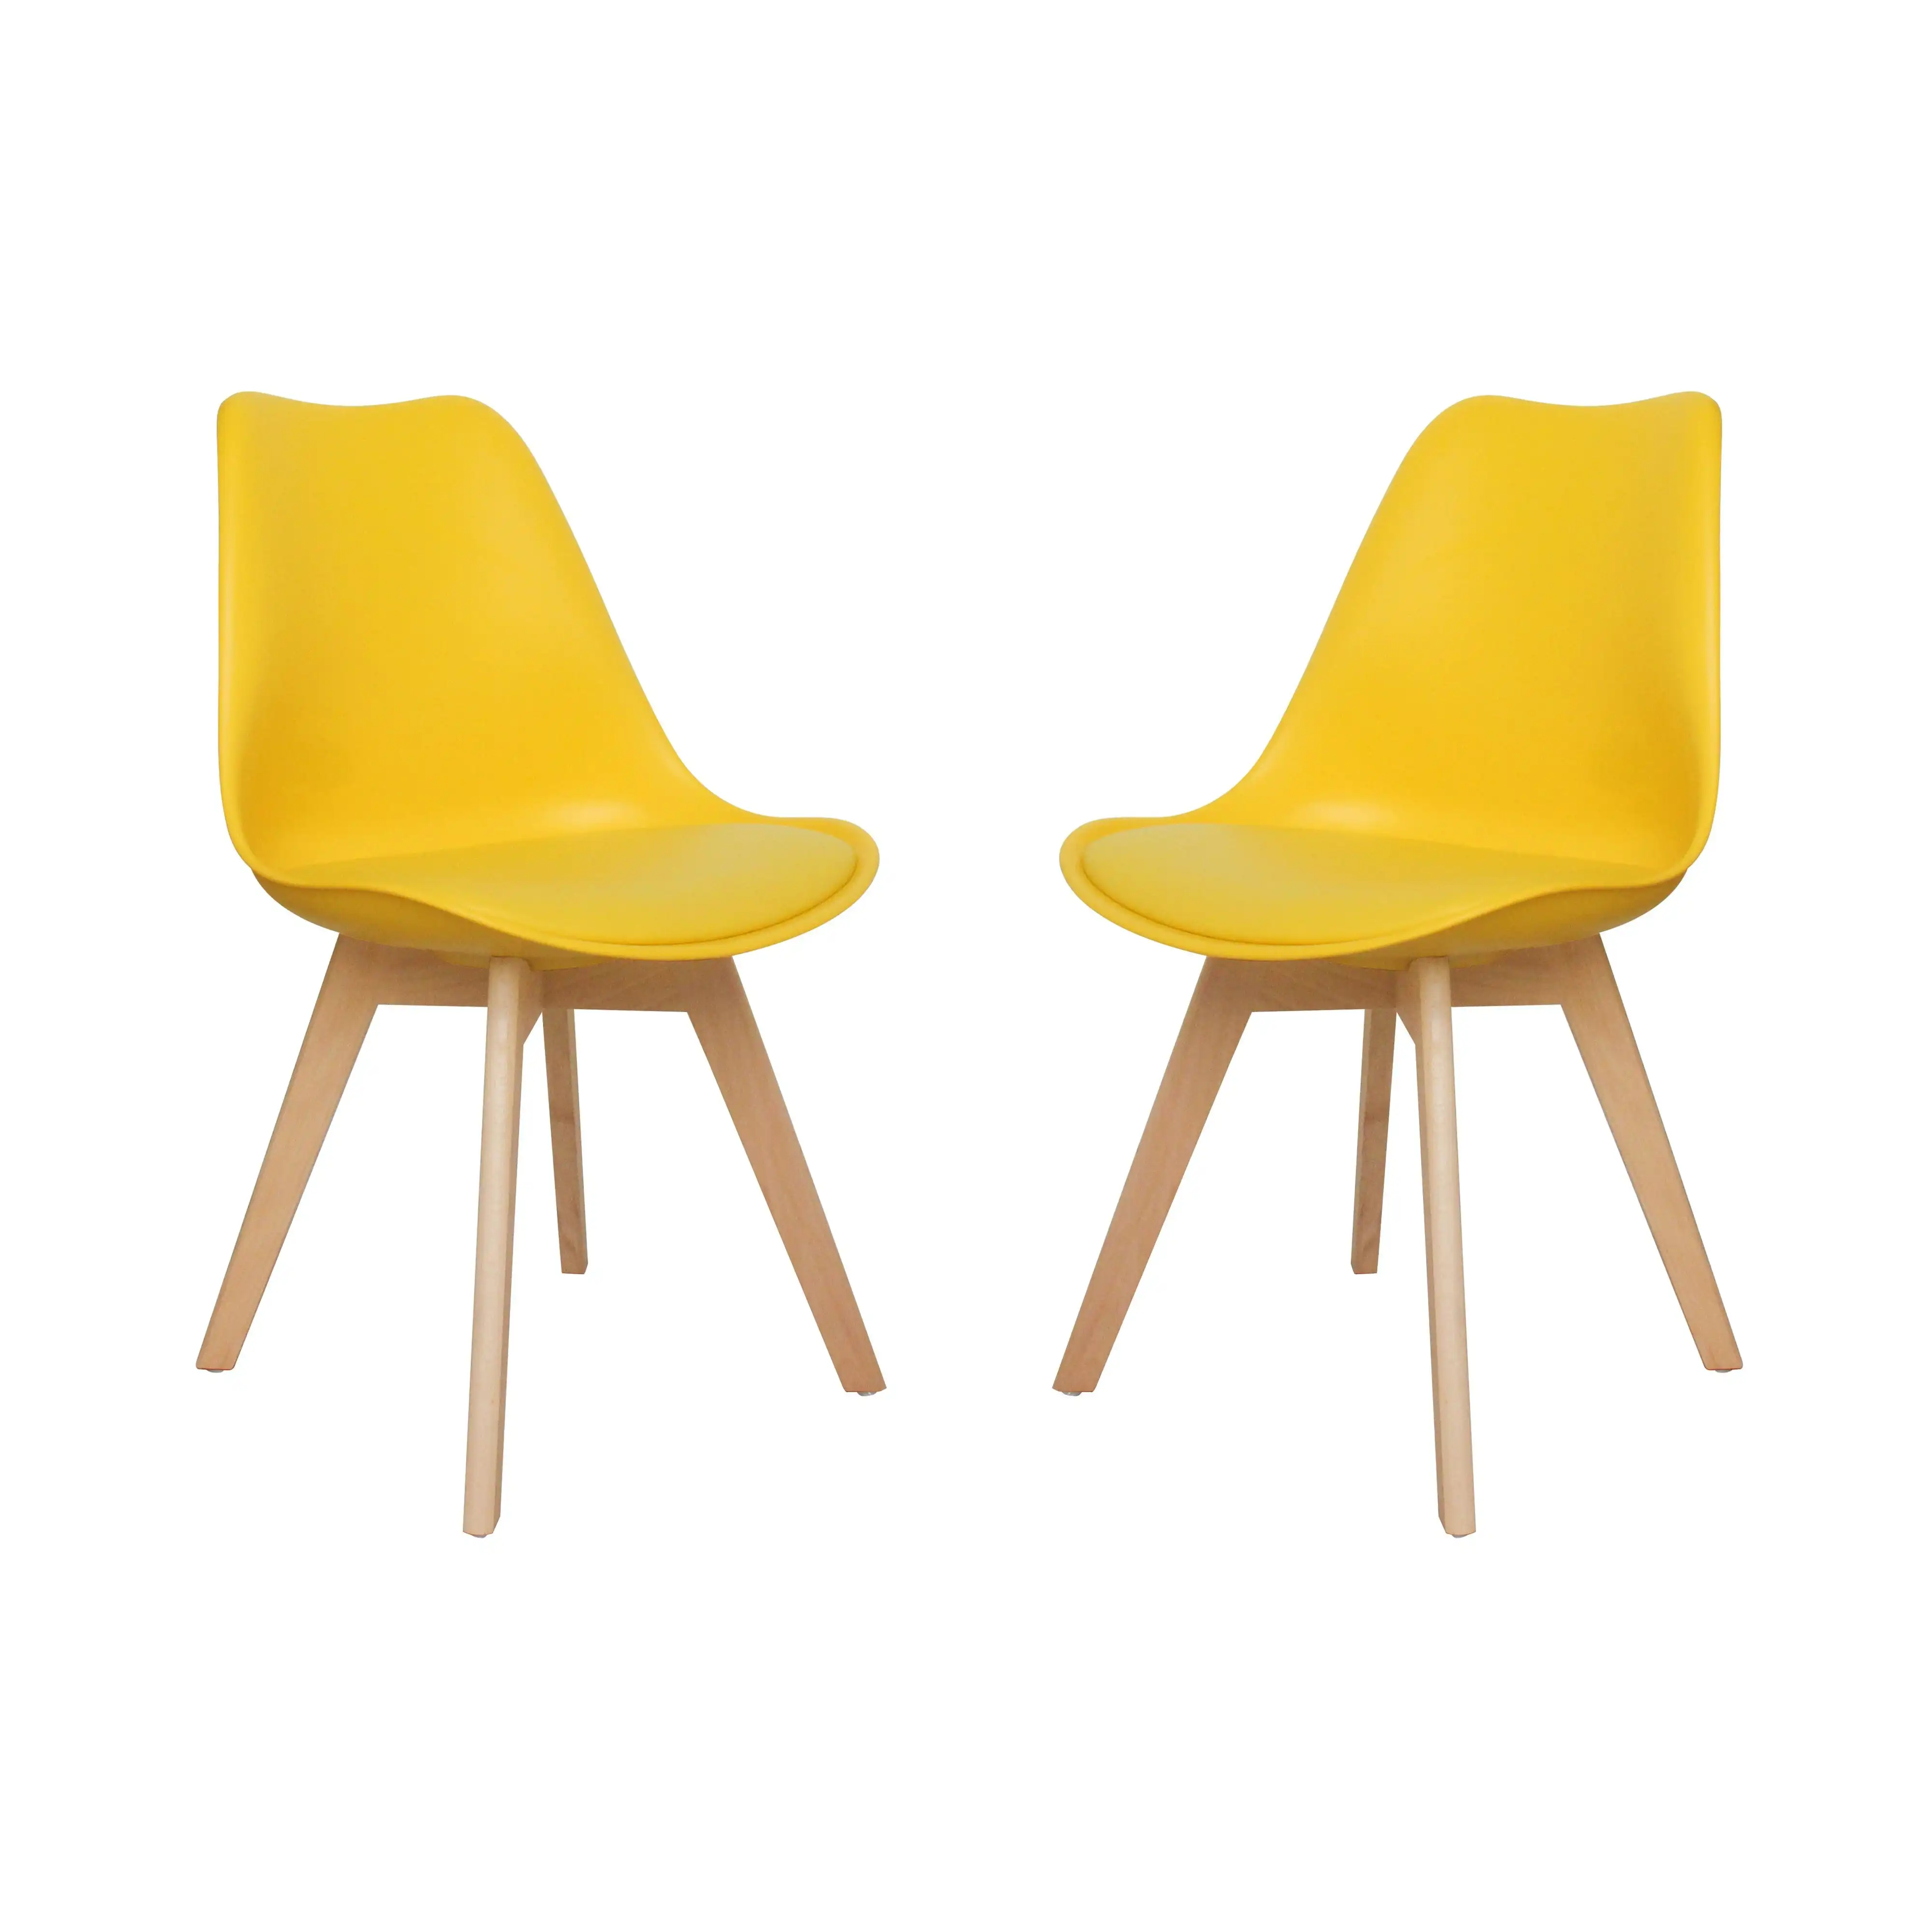 Chotto - Ando Dining Chairs - Yellow x 2